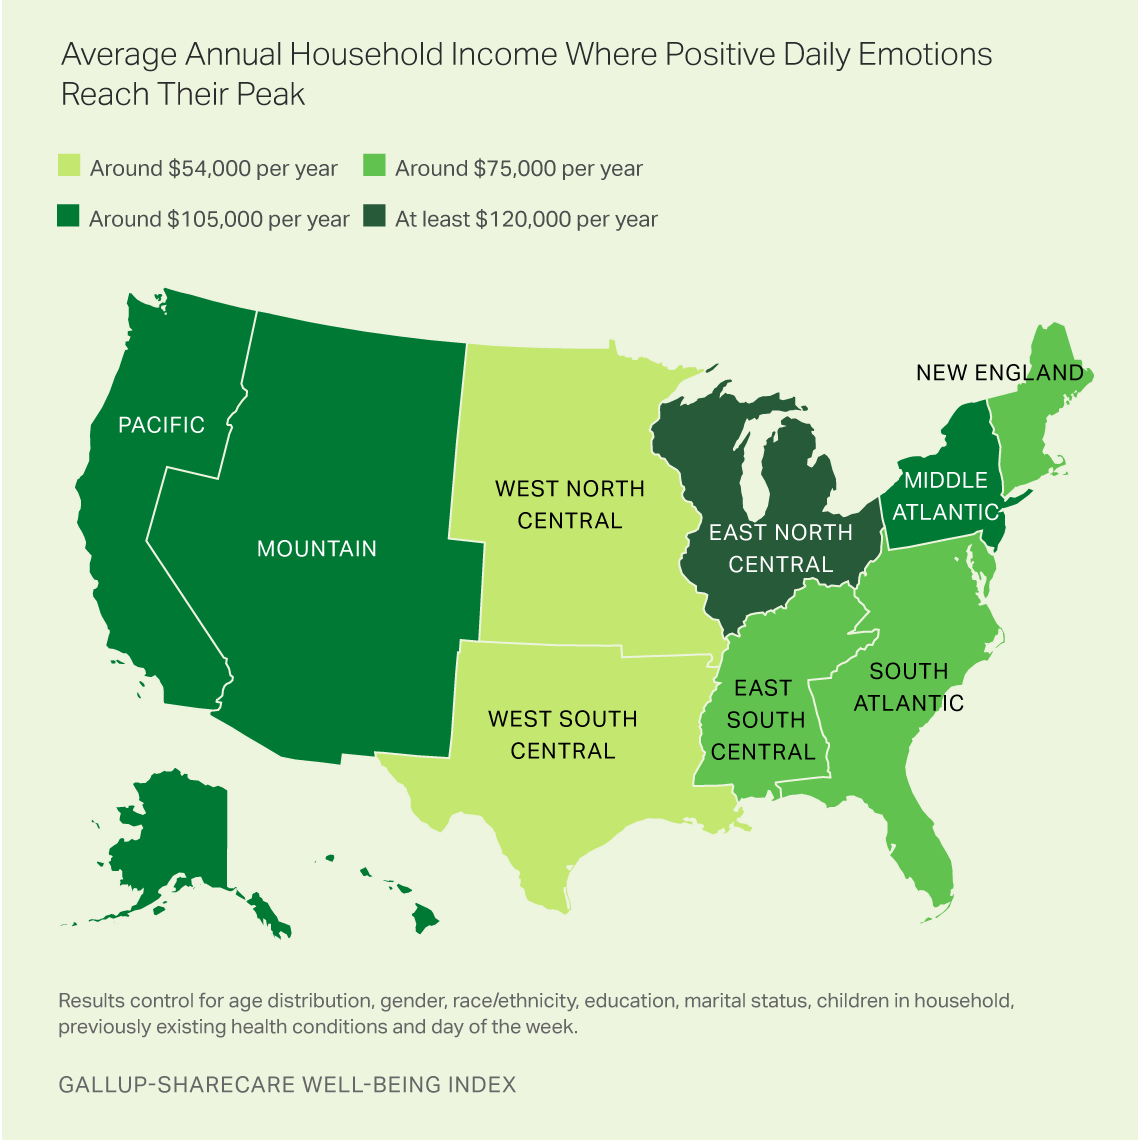 Average Annual Household Income Where Positive Daily Emotions Reach Their Peak